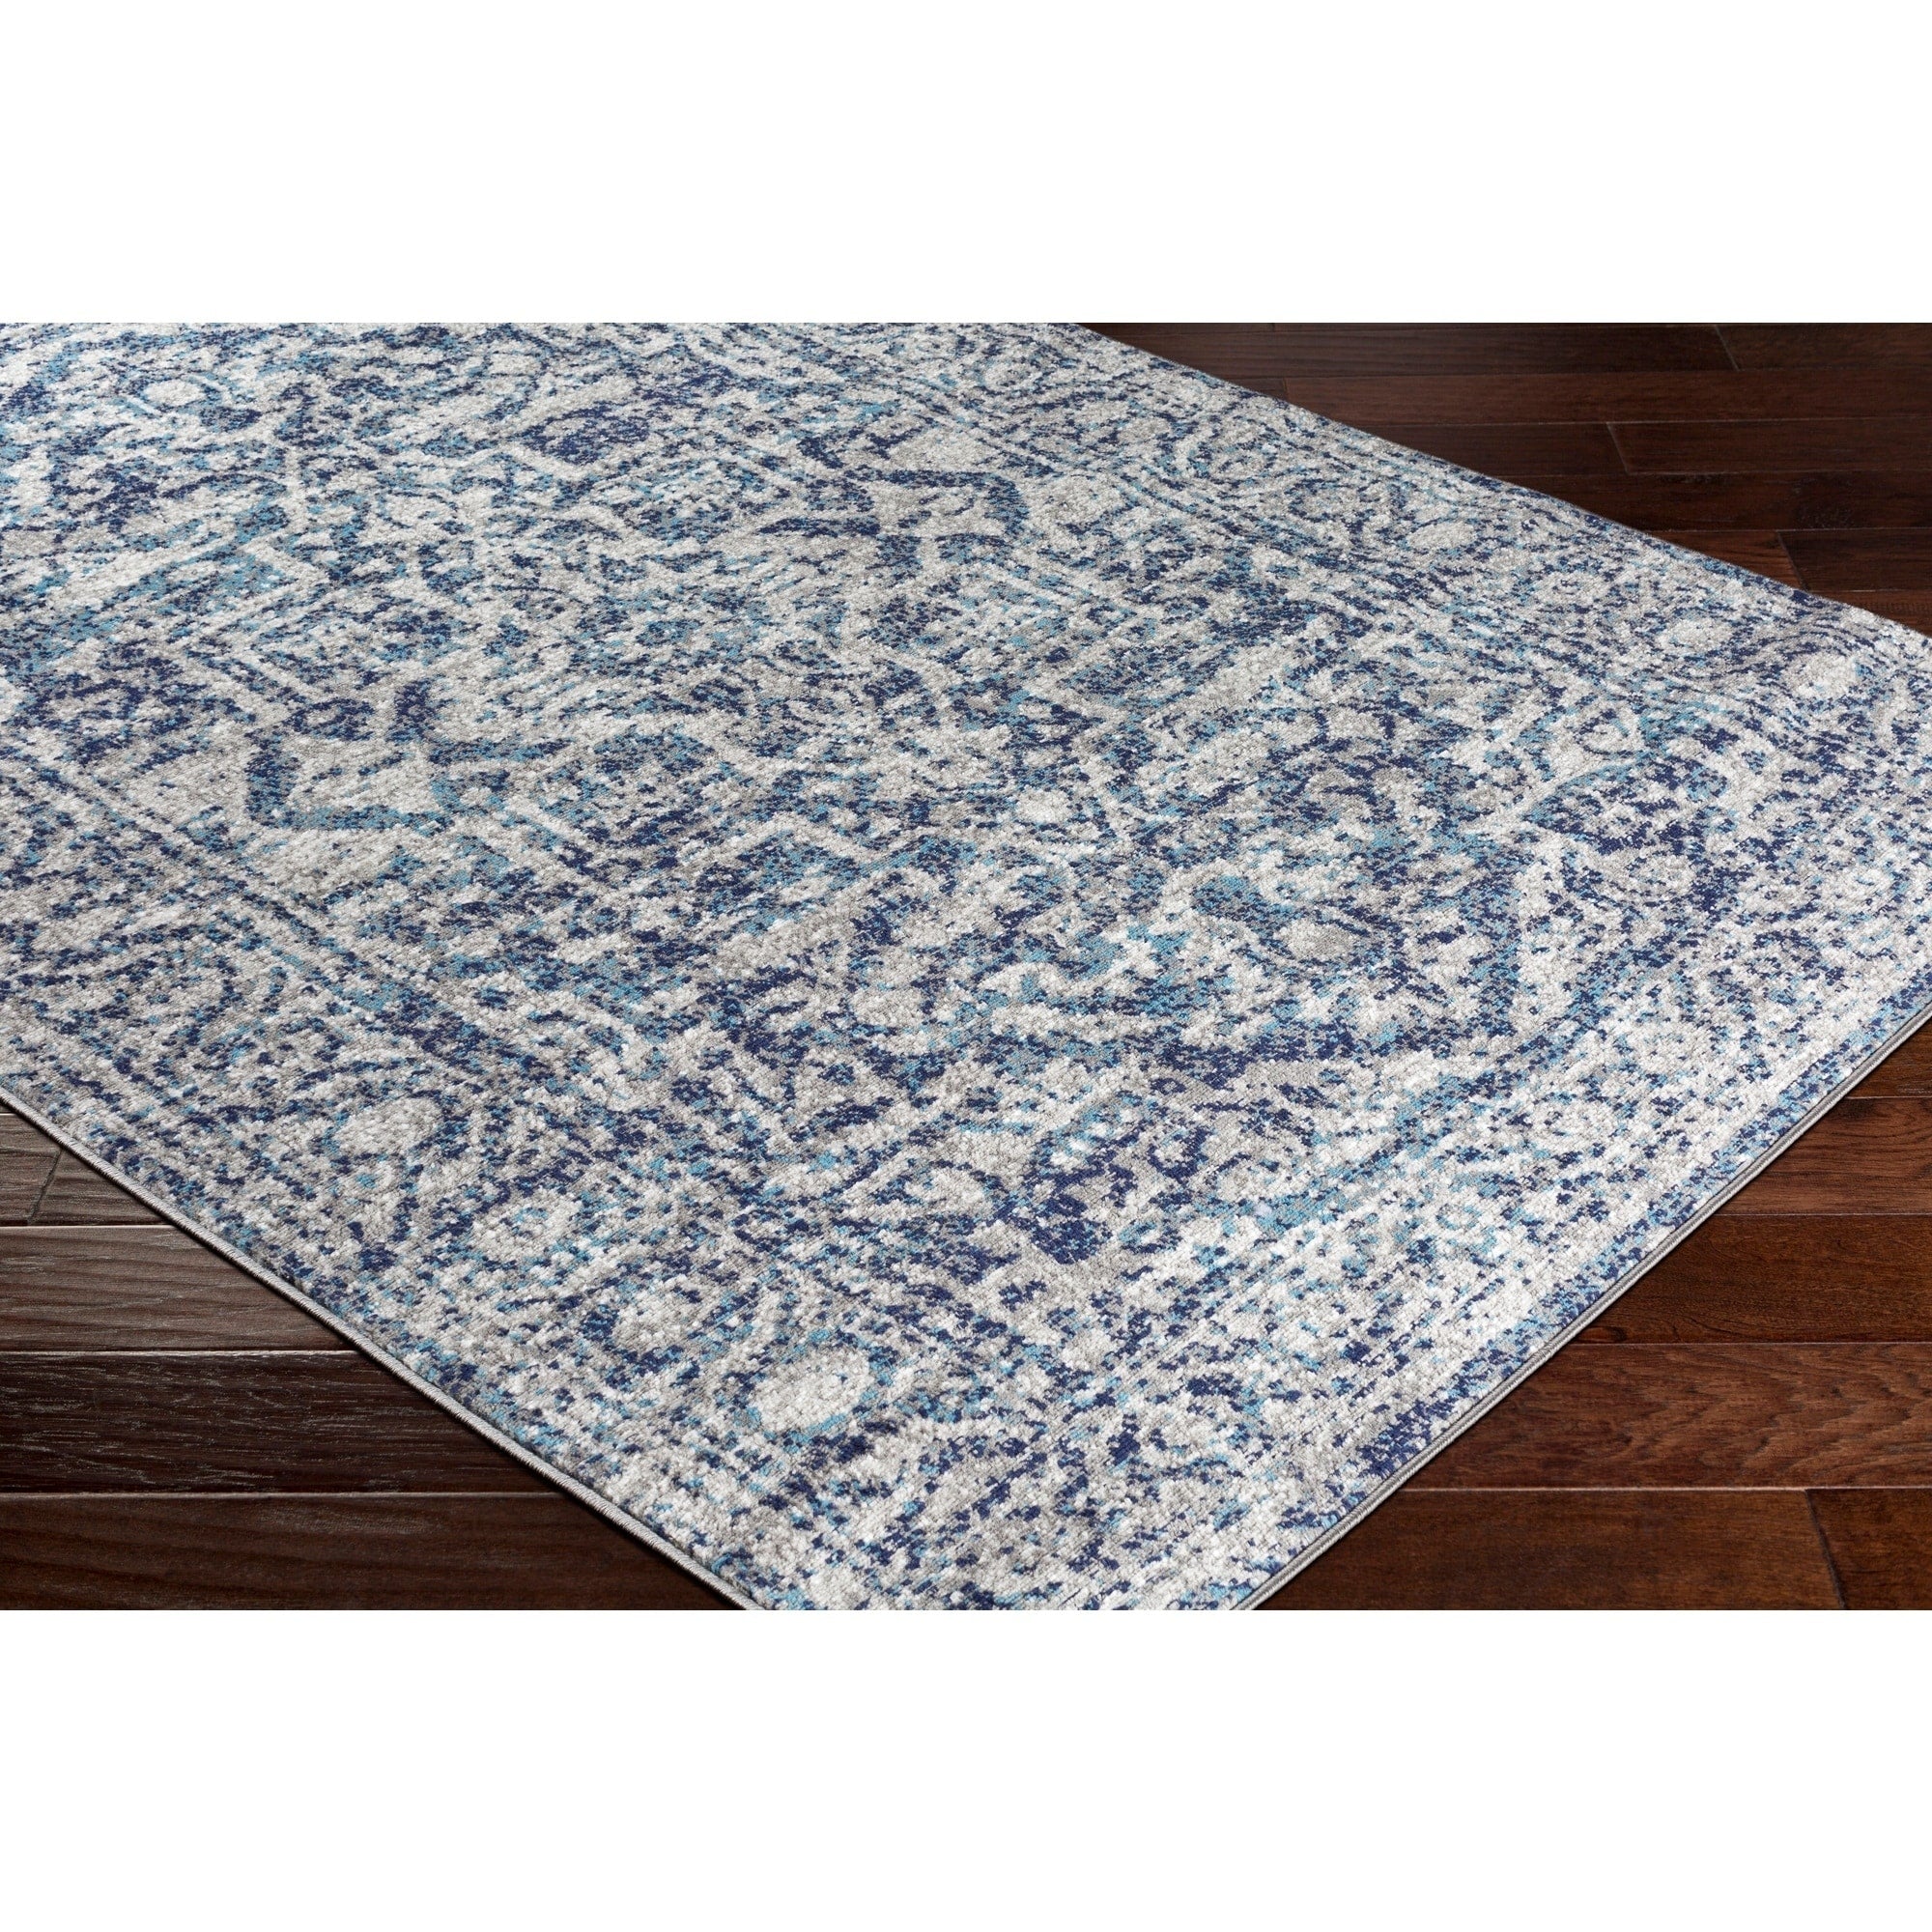 Vintage Navy Blue Gray White Area Rug – Modern Rugs and Decor